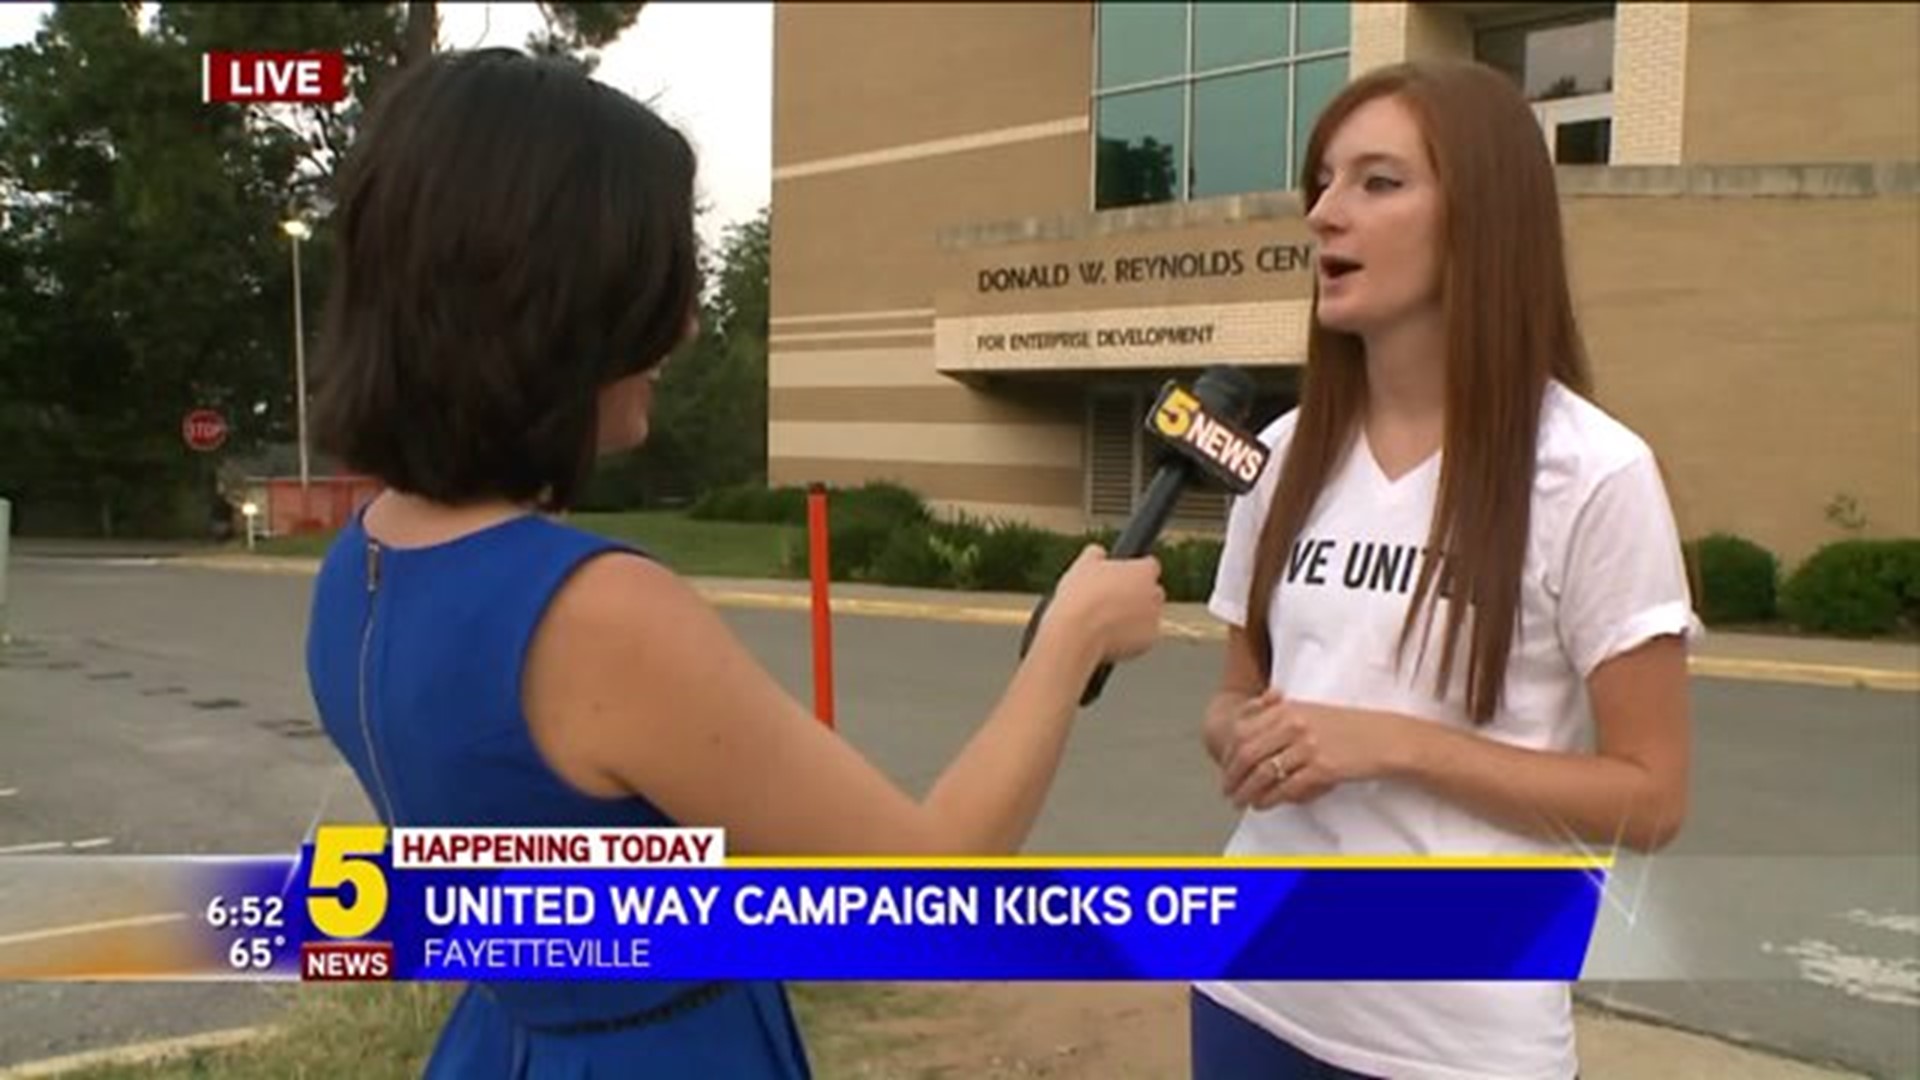 UNITED WAY CAMPAIGN